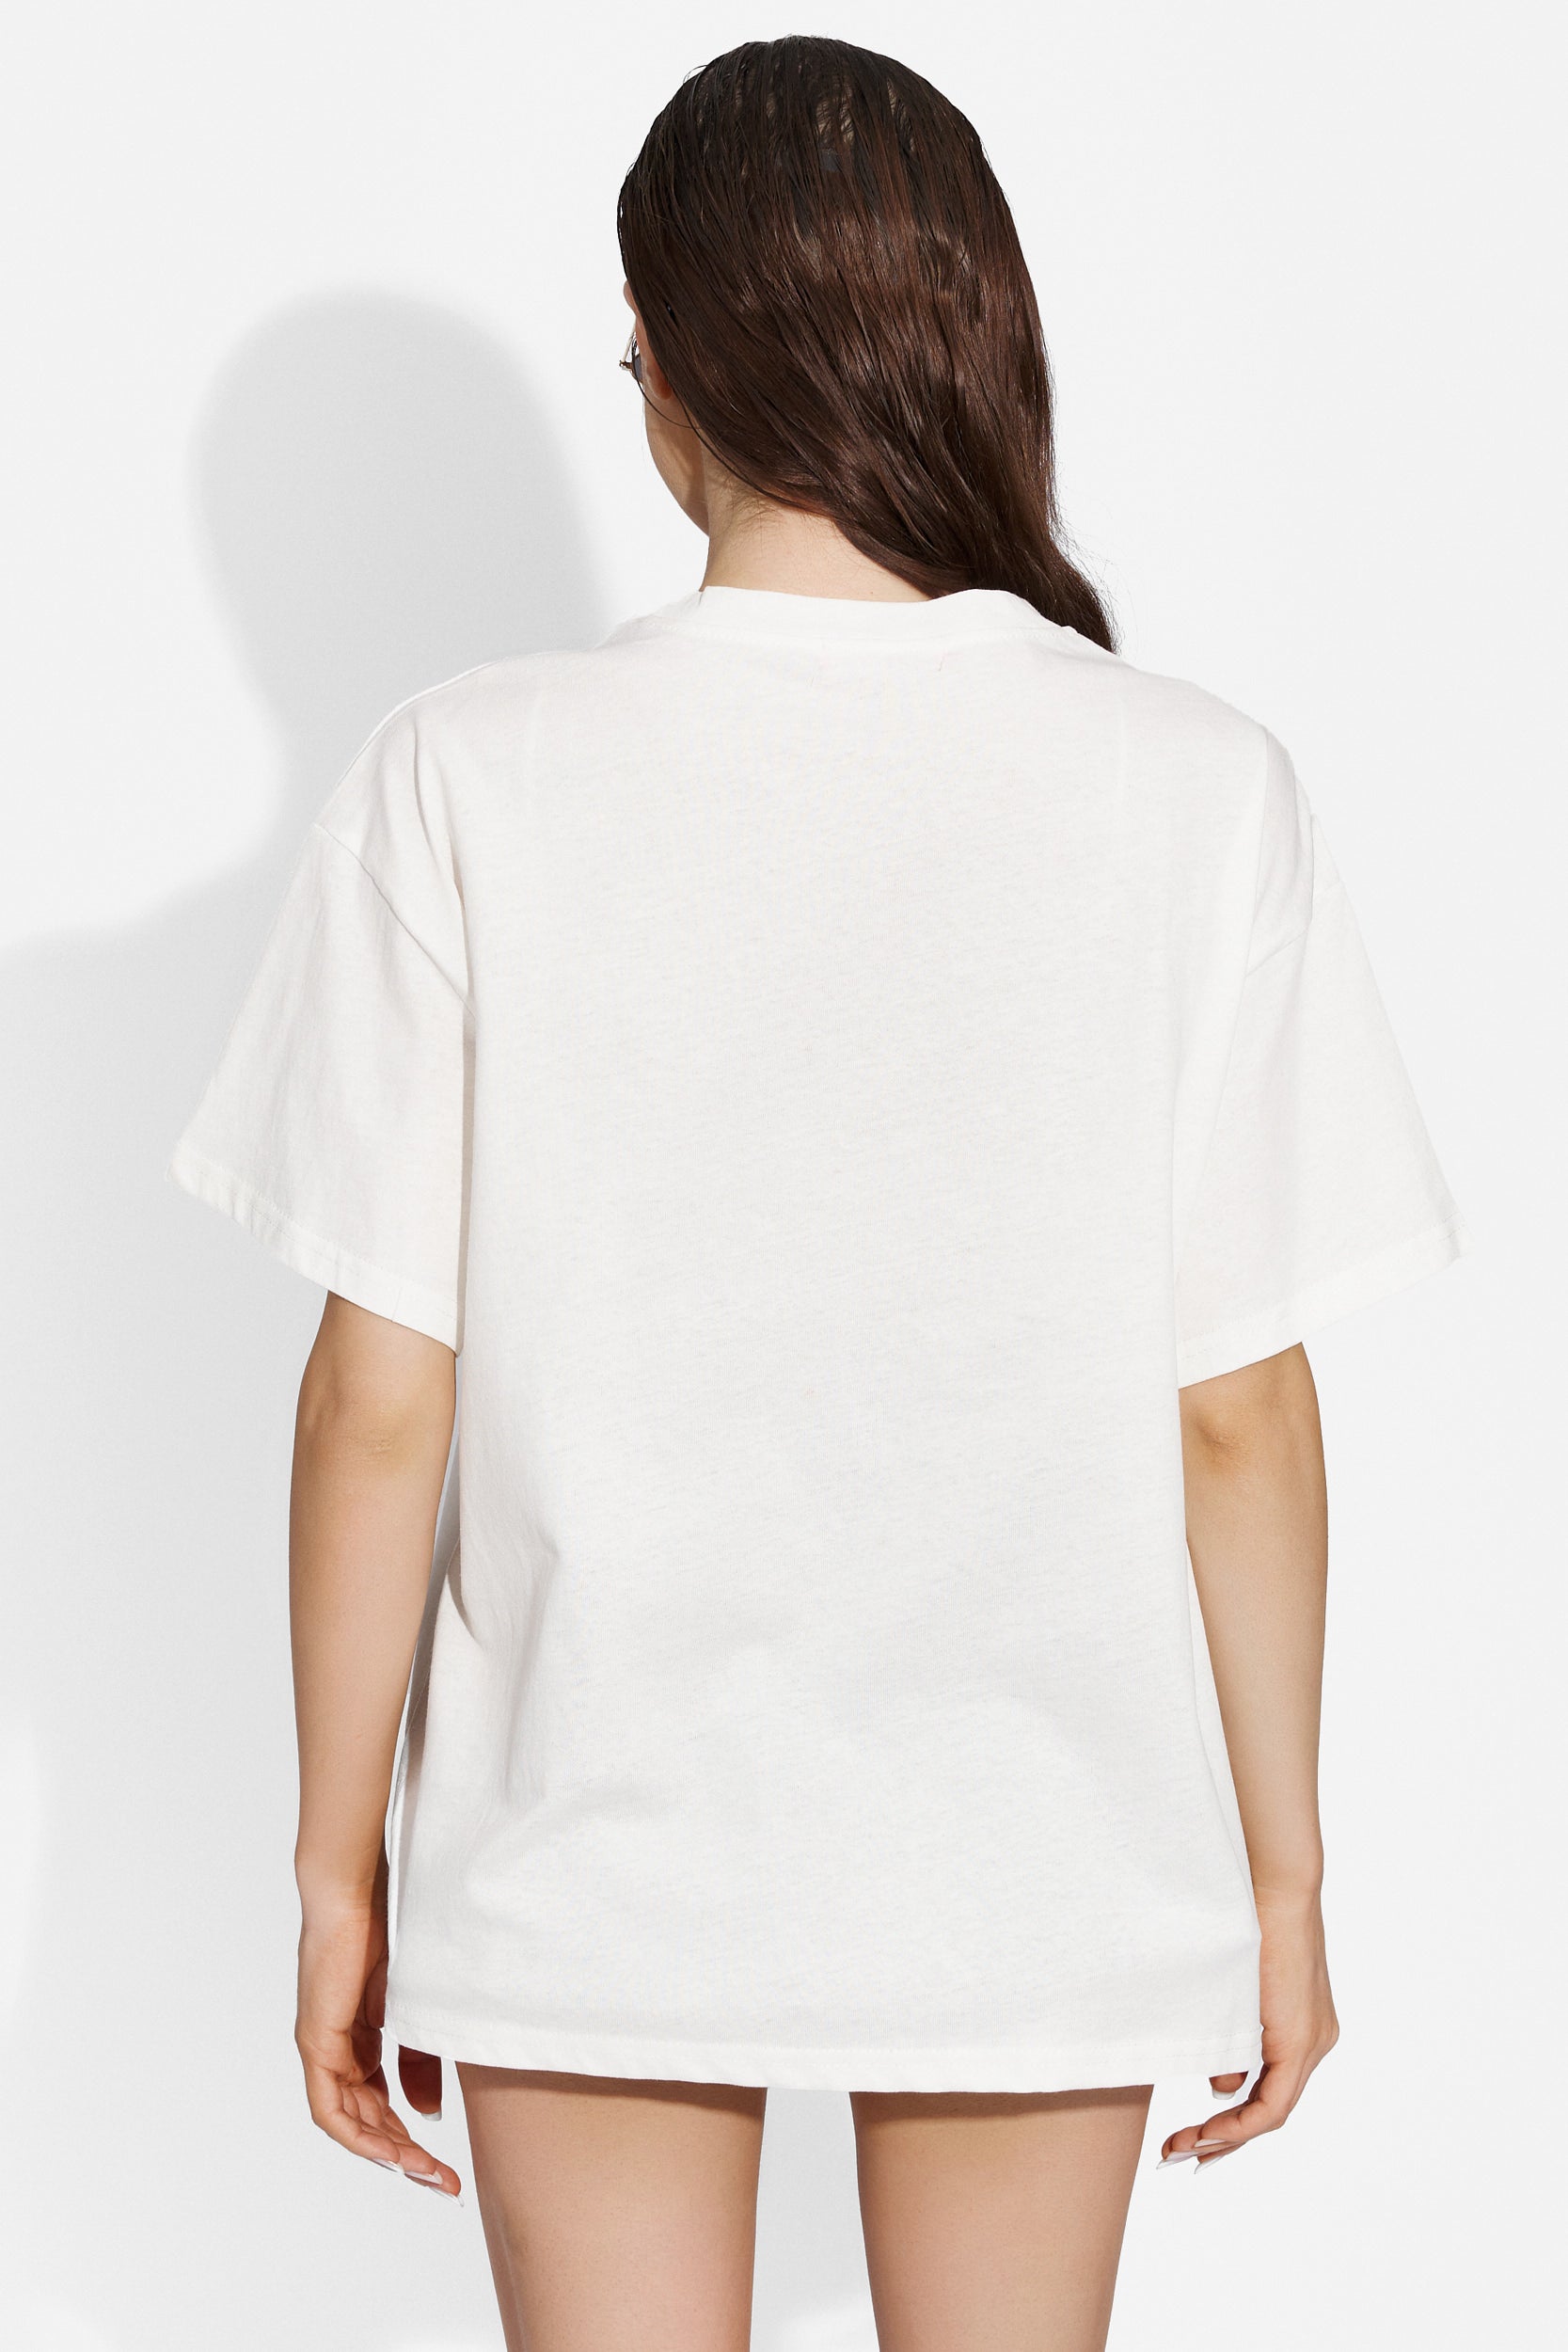 Noutany Bogas casual white ladies t-shirt